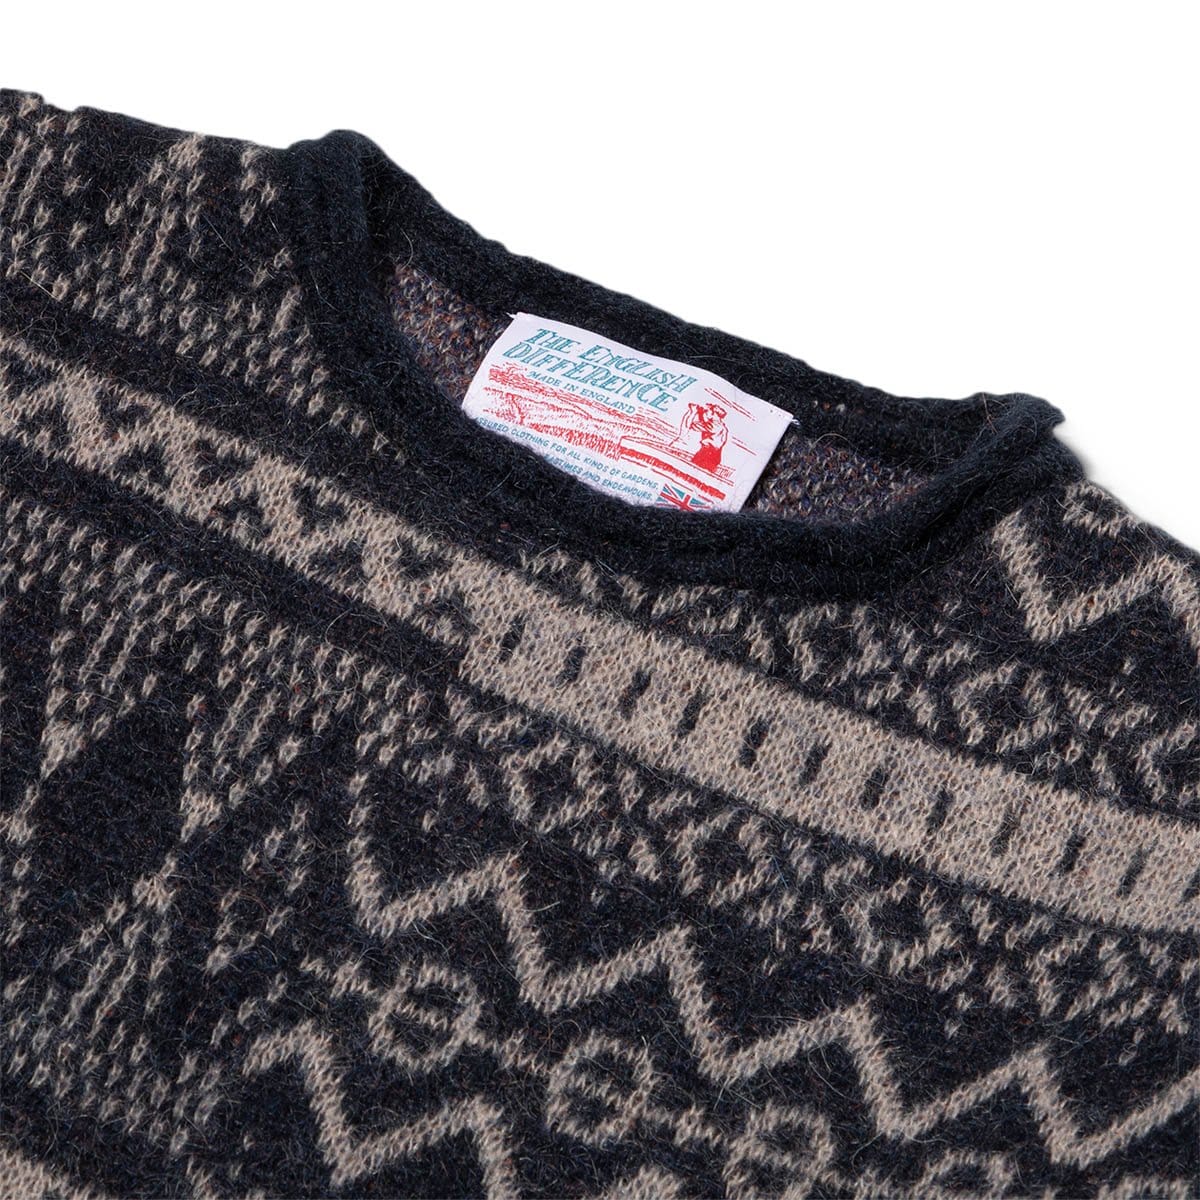 Garbstore Knitwear THE ENGLISH DIFFERENCE FAIR ISLE CREW